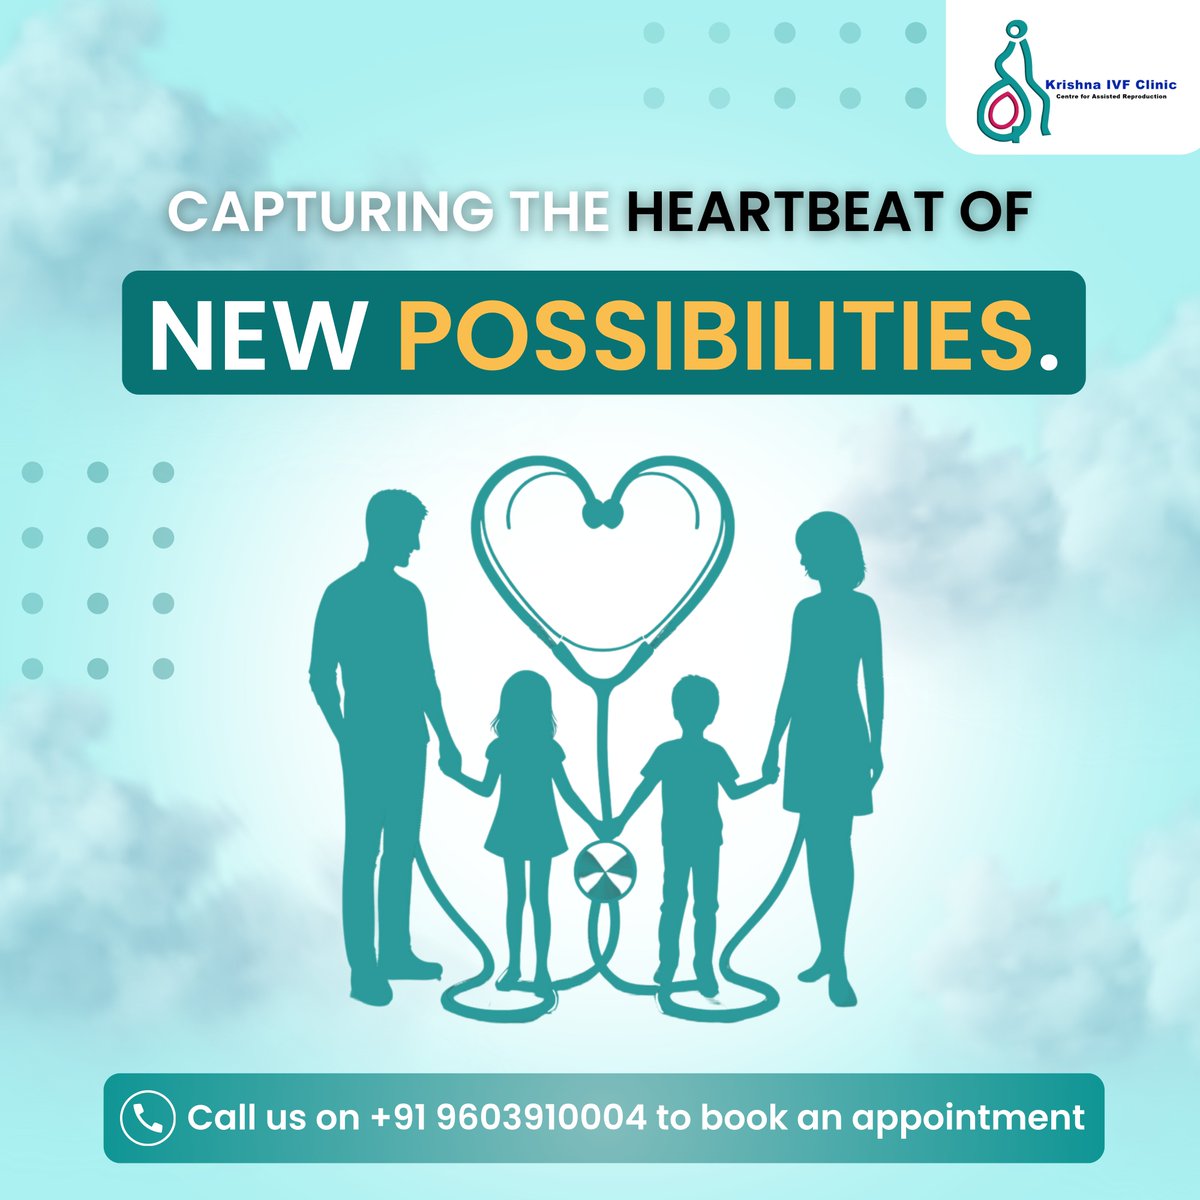 Capturing the heartbeat of new possibilities at Krishna IVF, where dreams take root and miracles unfold.

To book an appointment today call us on +91 9603910004

#krishnaivf #Ivf #ivfcentre #fertility #ivfhospital #family #ivfsuccess #parents #parenthood #fertilityspecialist